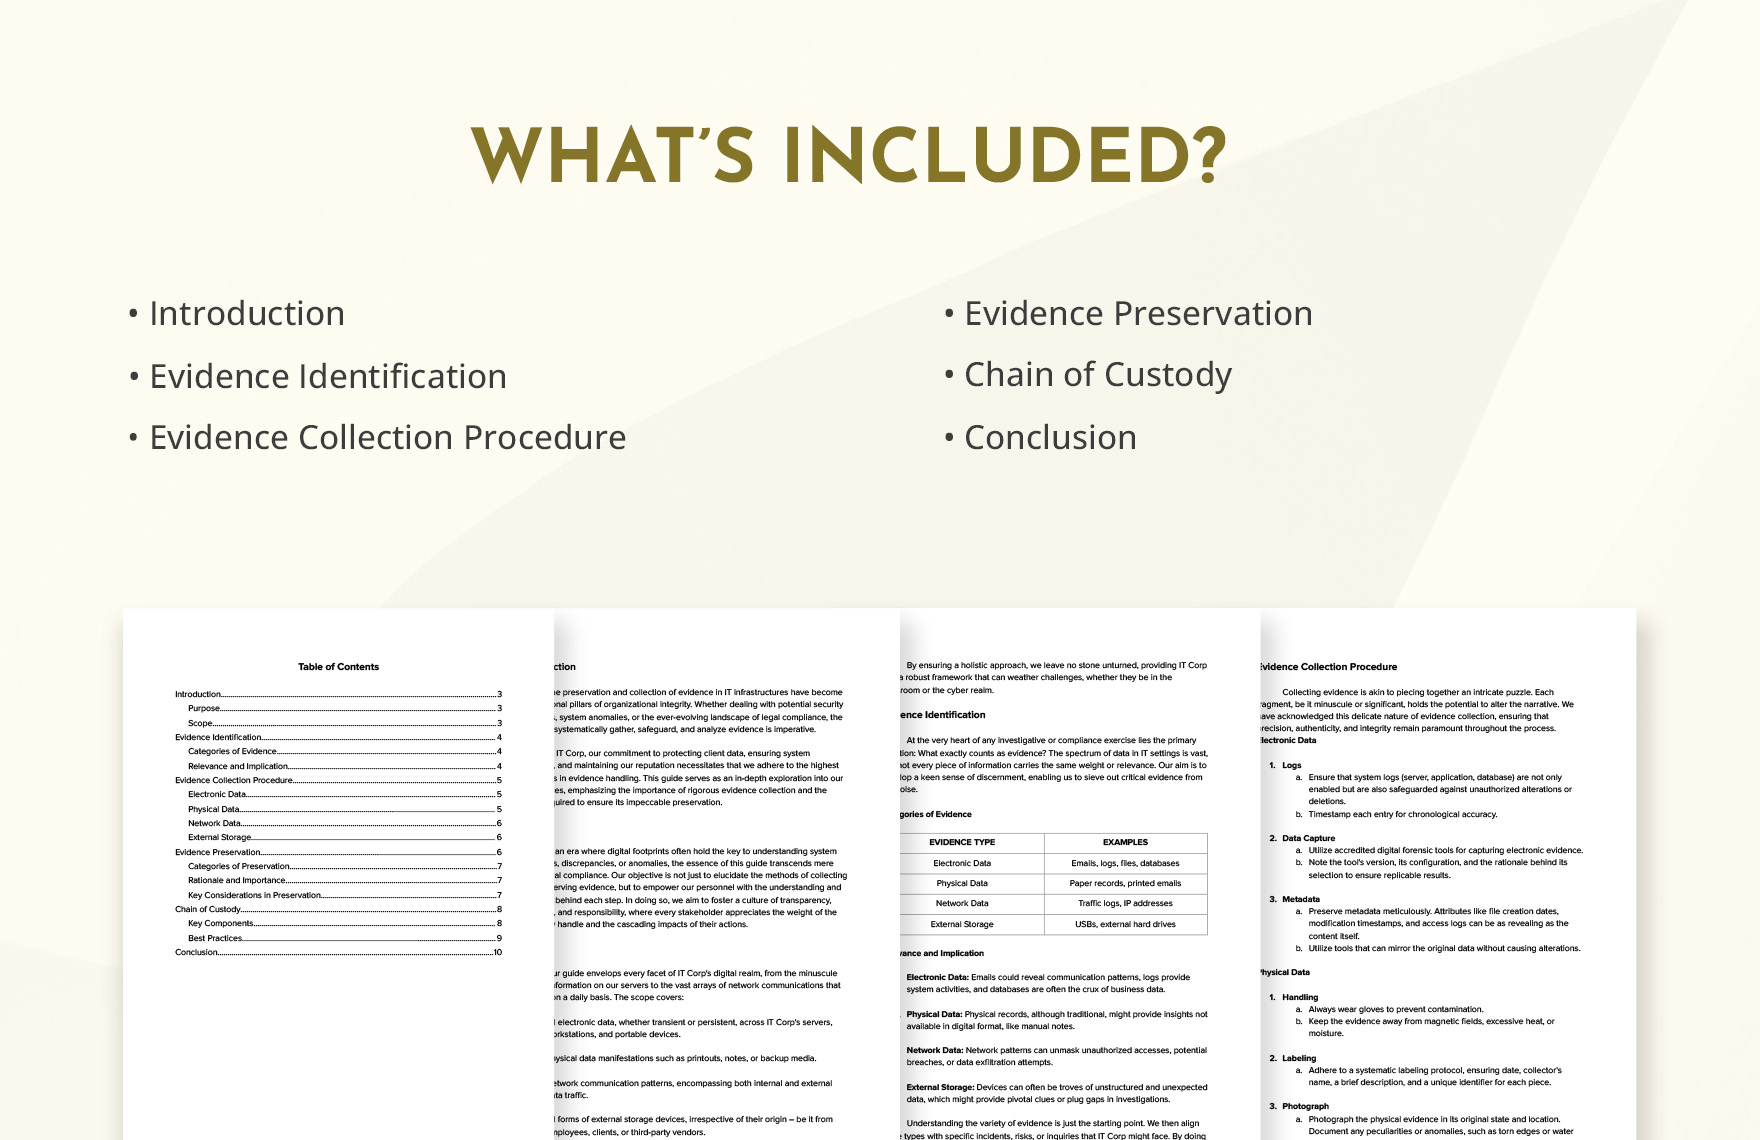 IT Evidence Collection and Preservation Guide Template